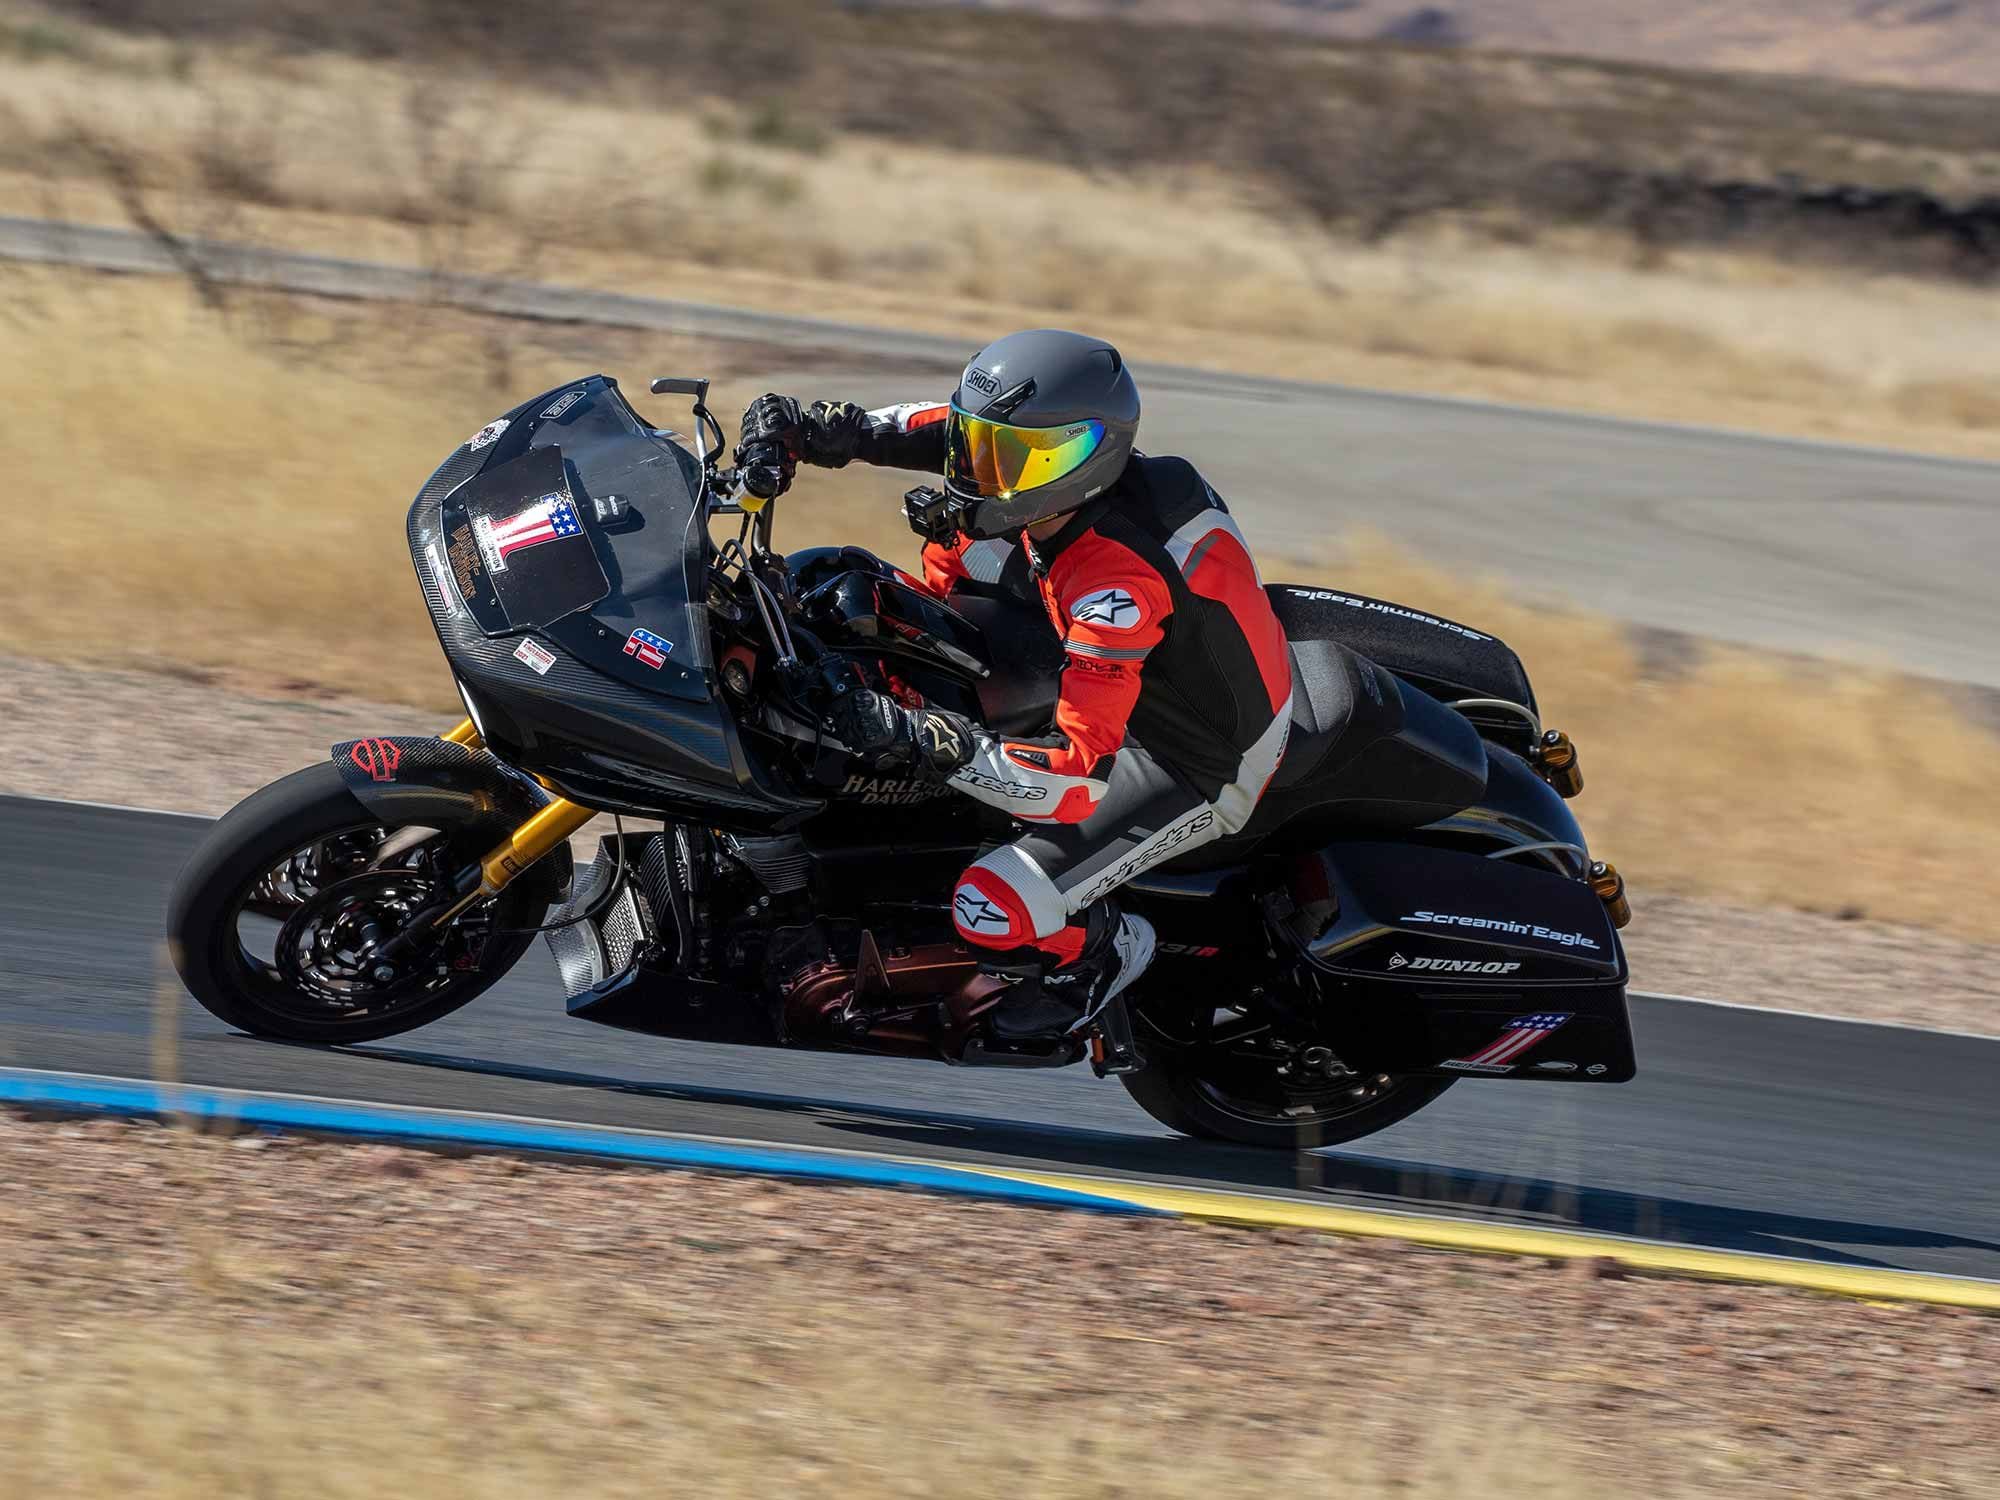 Contrary to spec-sheet spy speculations, the Harley-Davidson Screamin’ Eagle Road Glide Special shreds corners with a sportbike prowess and composure.